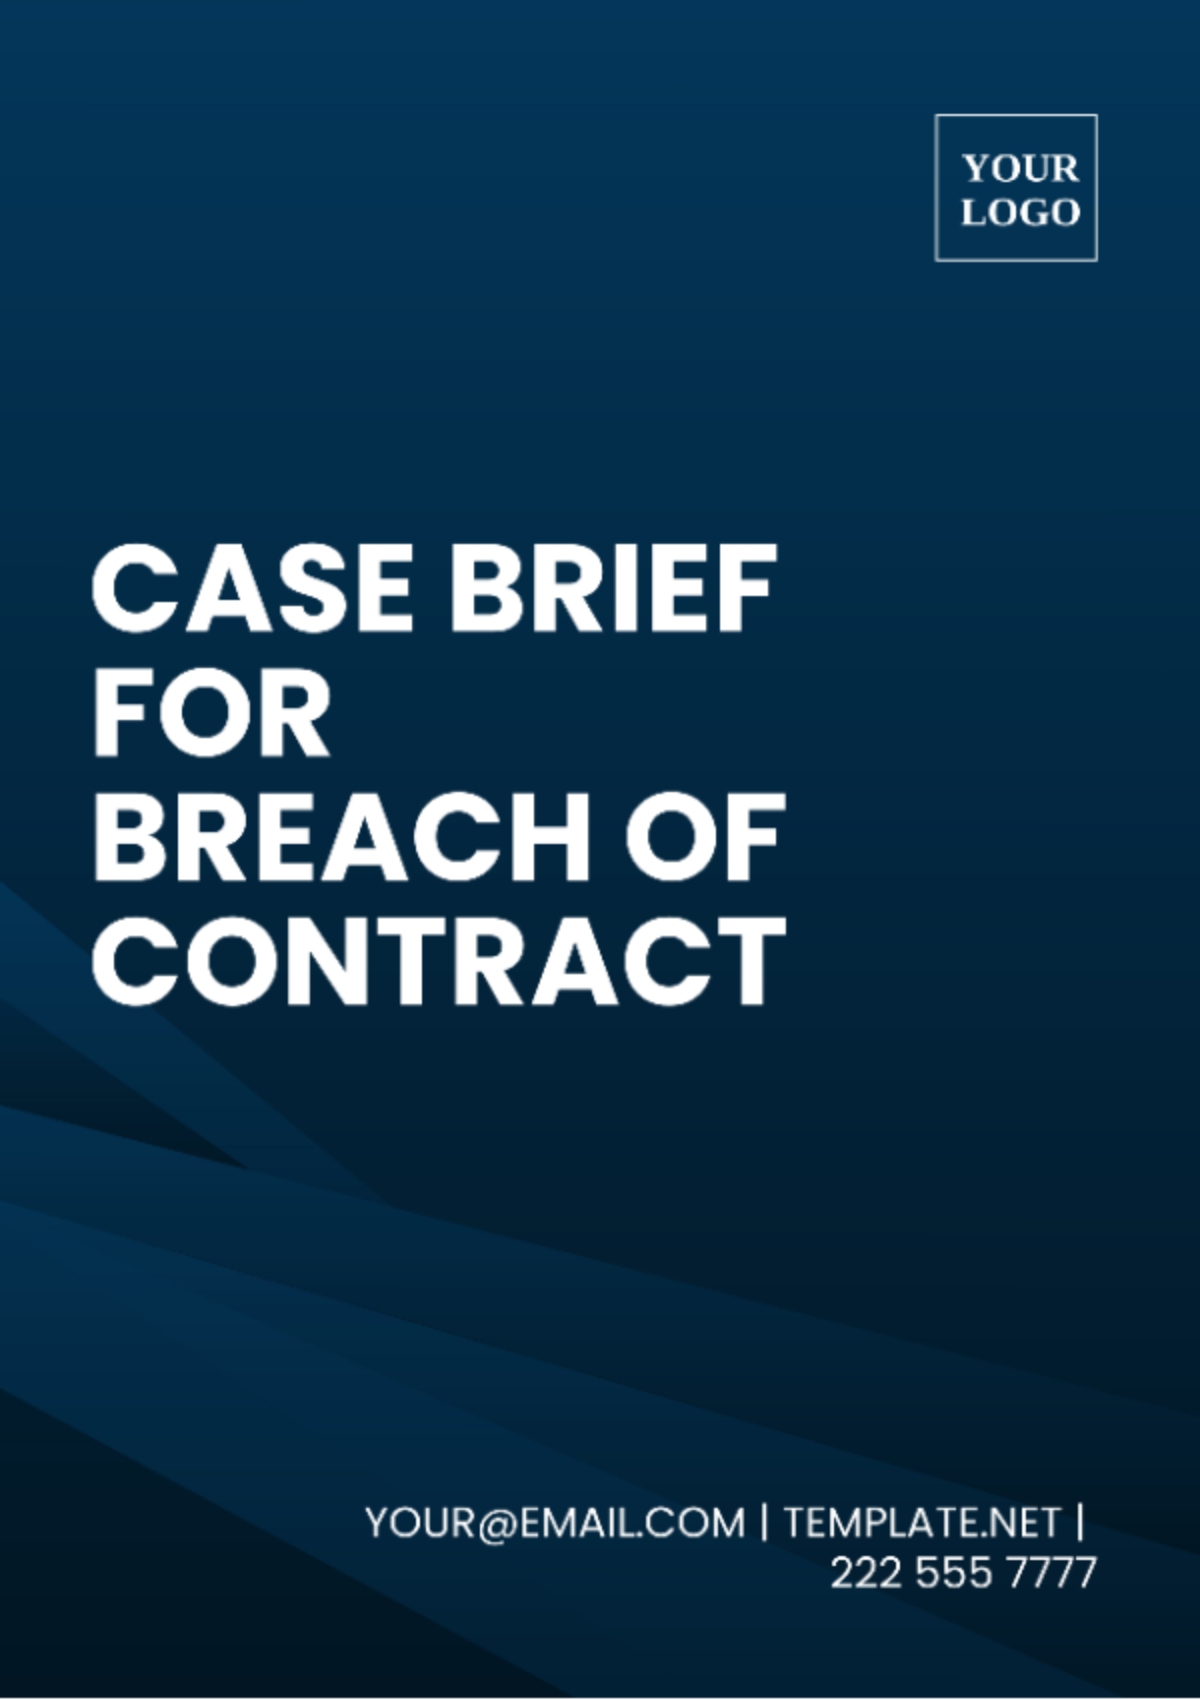 Free Case Brief for Breach of Contract Template